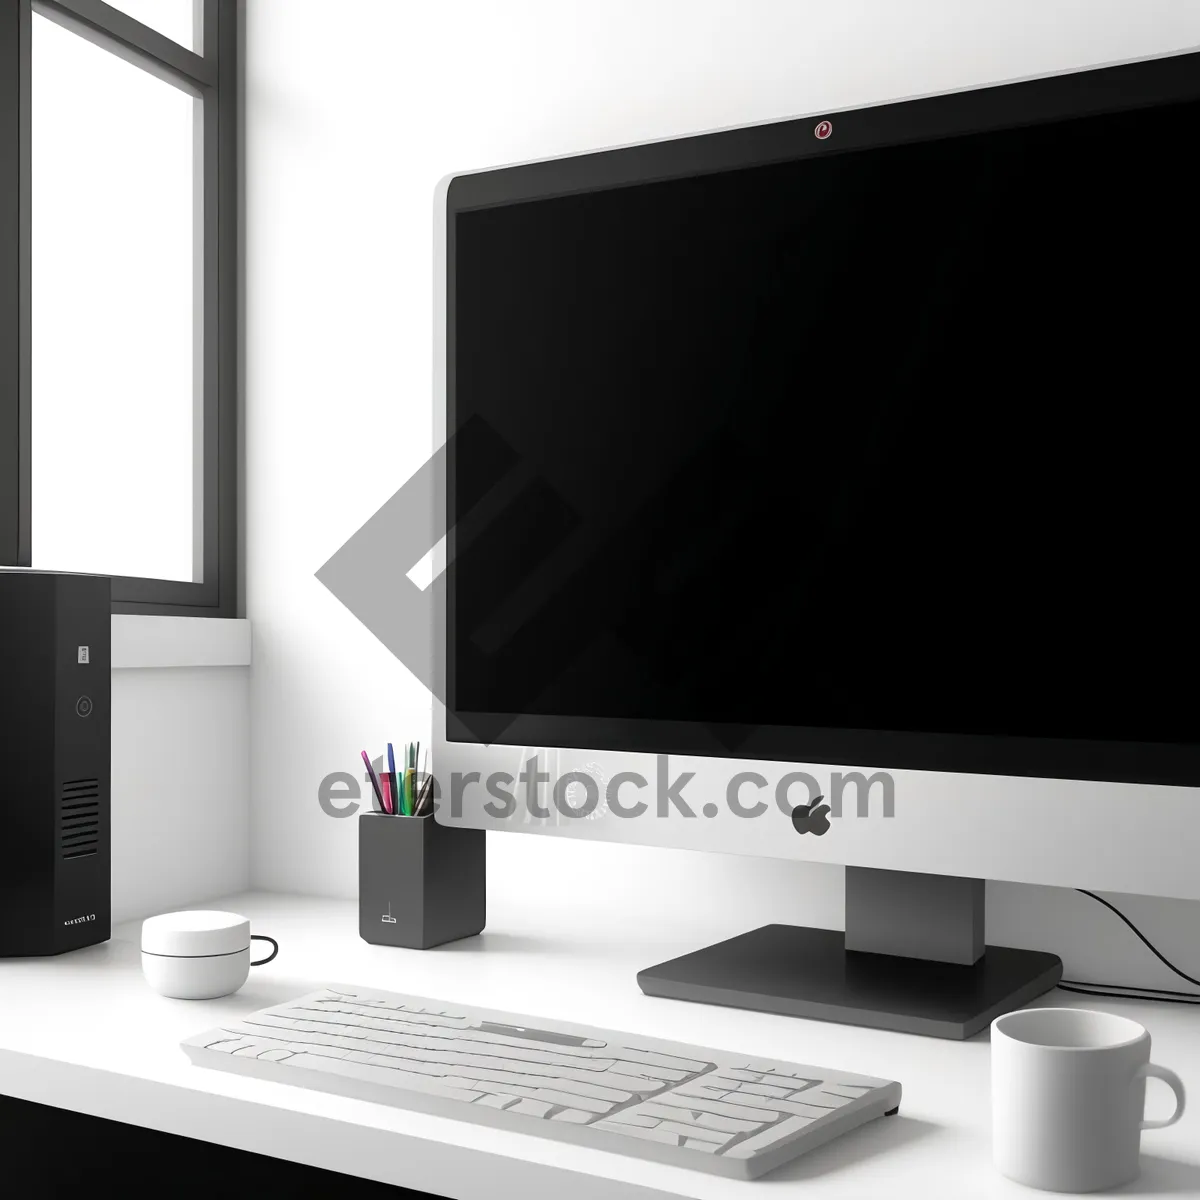 Picture of Modern Flat Screen Desktop Monitor with Keyboard